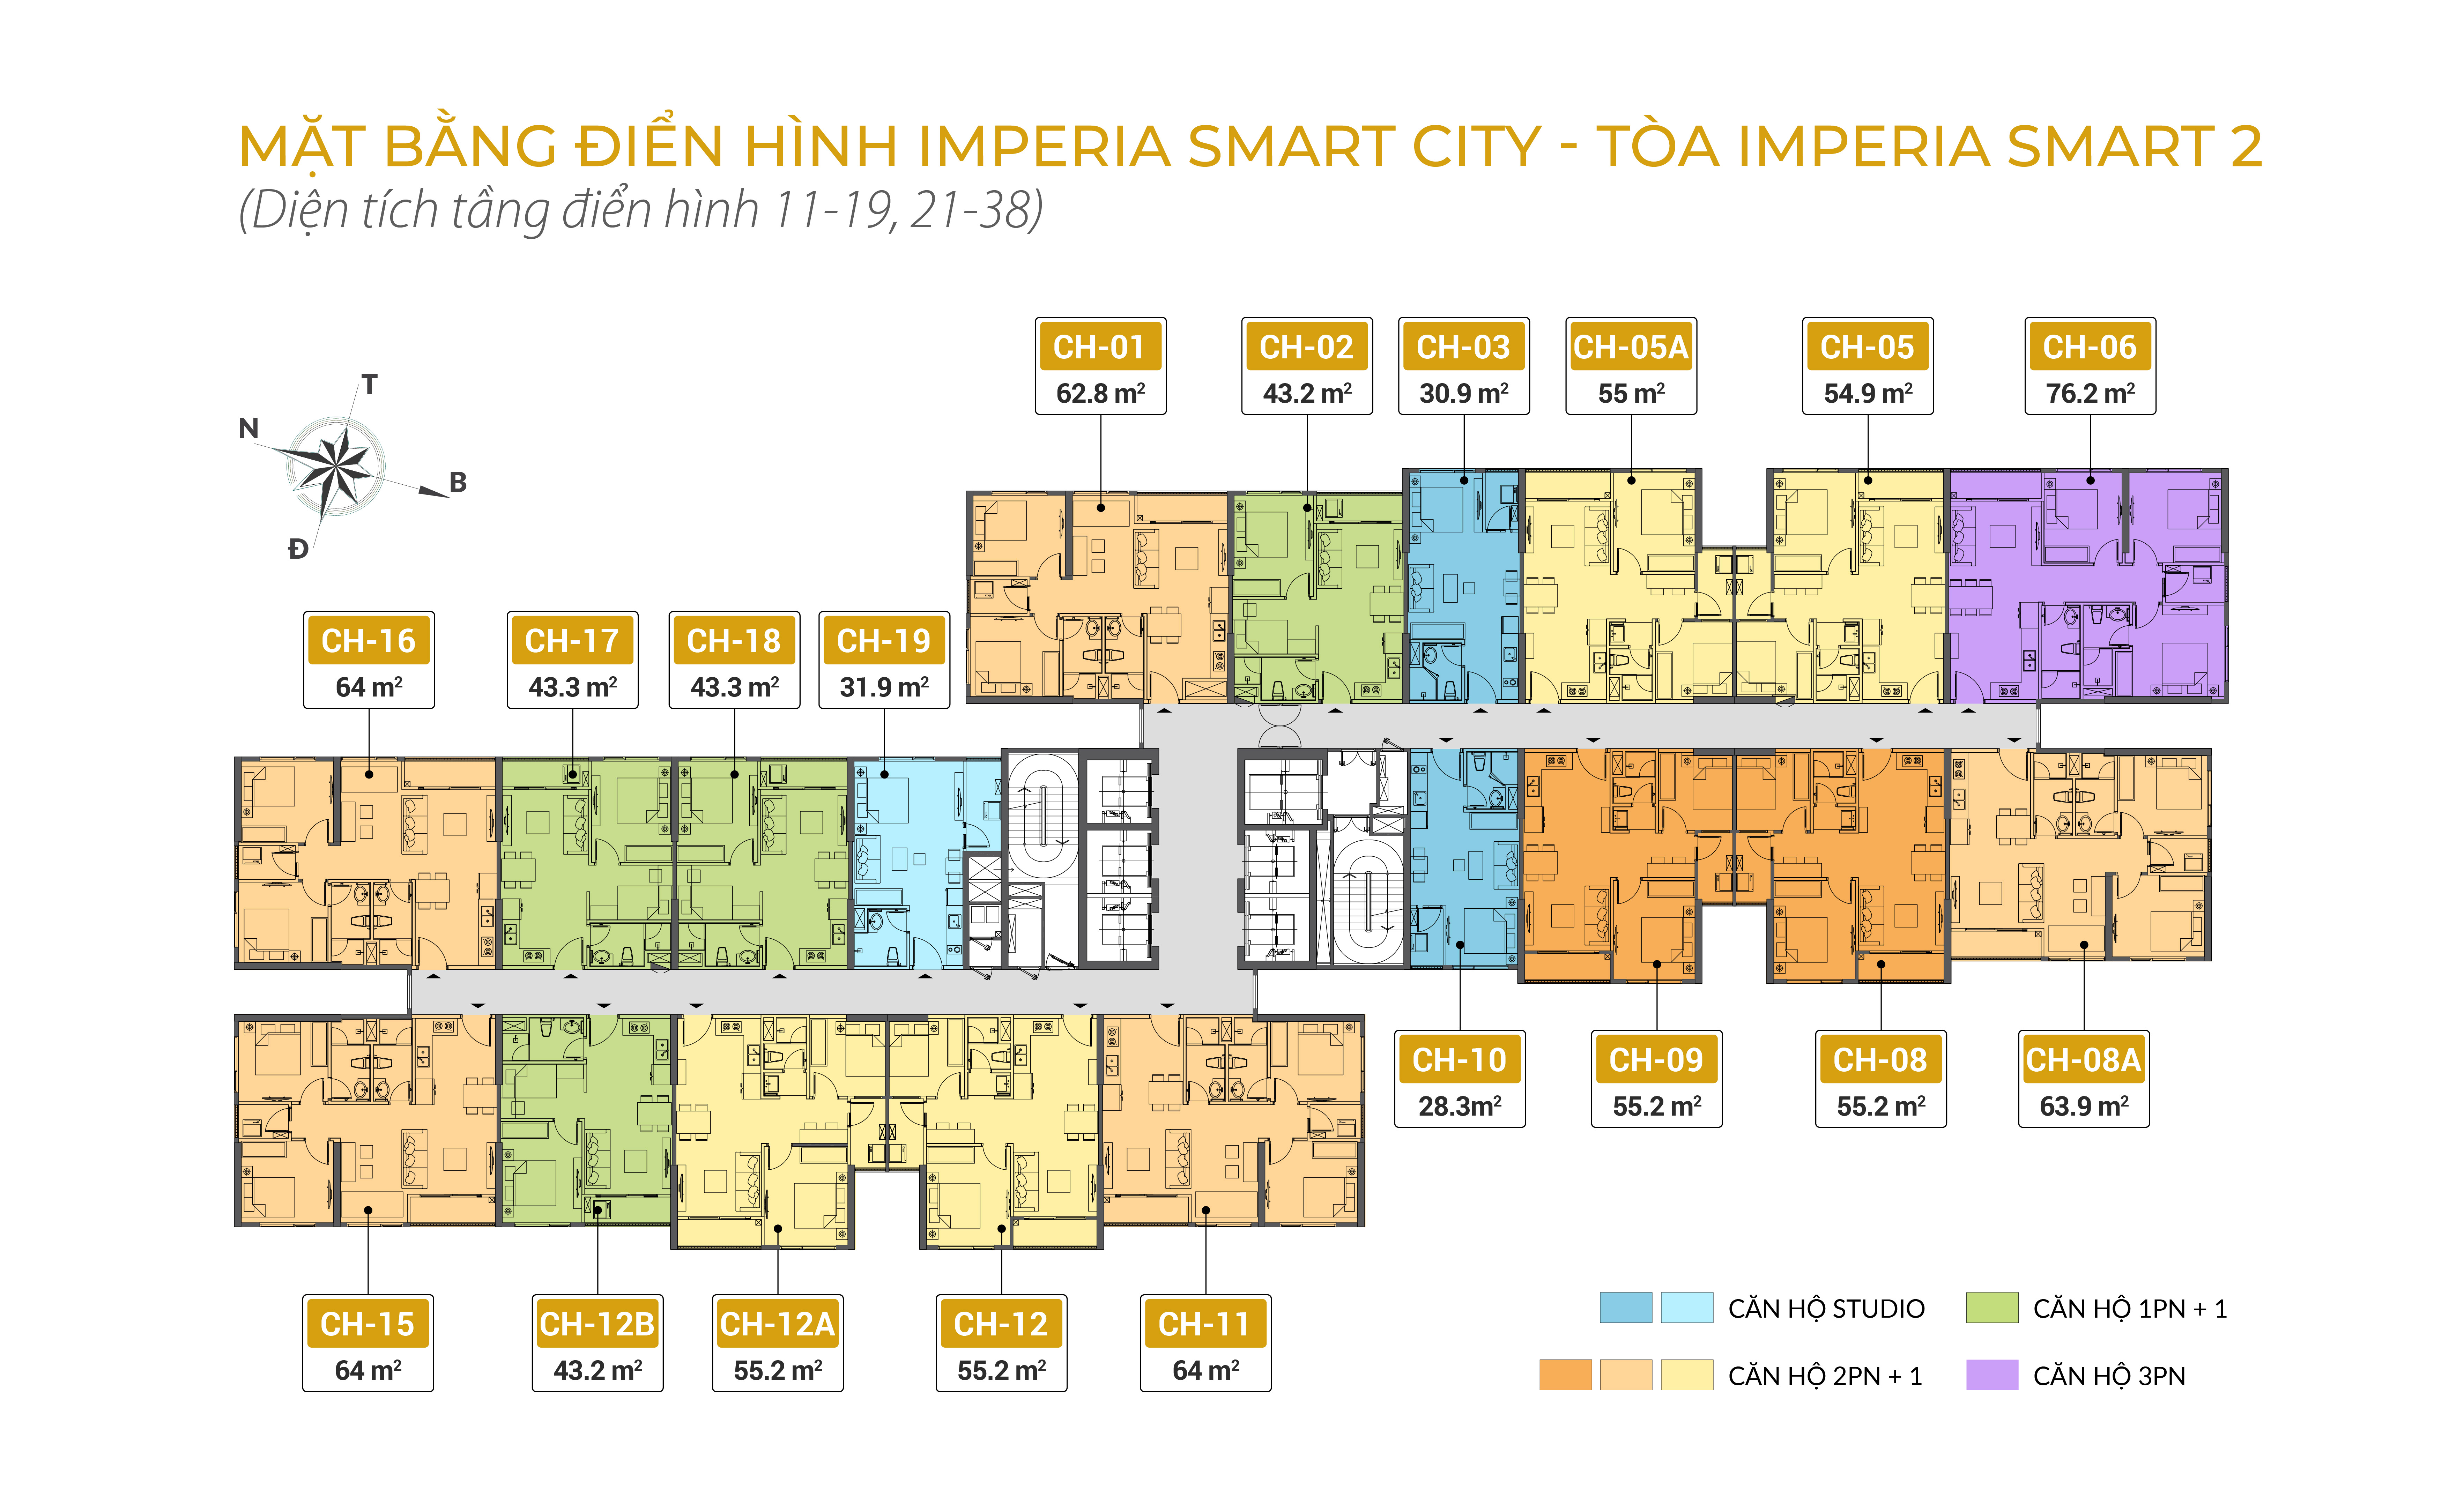 Mặt bằng tầng của Imperia Smart City